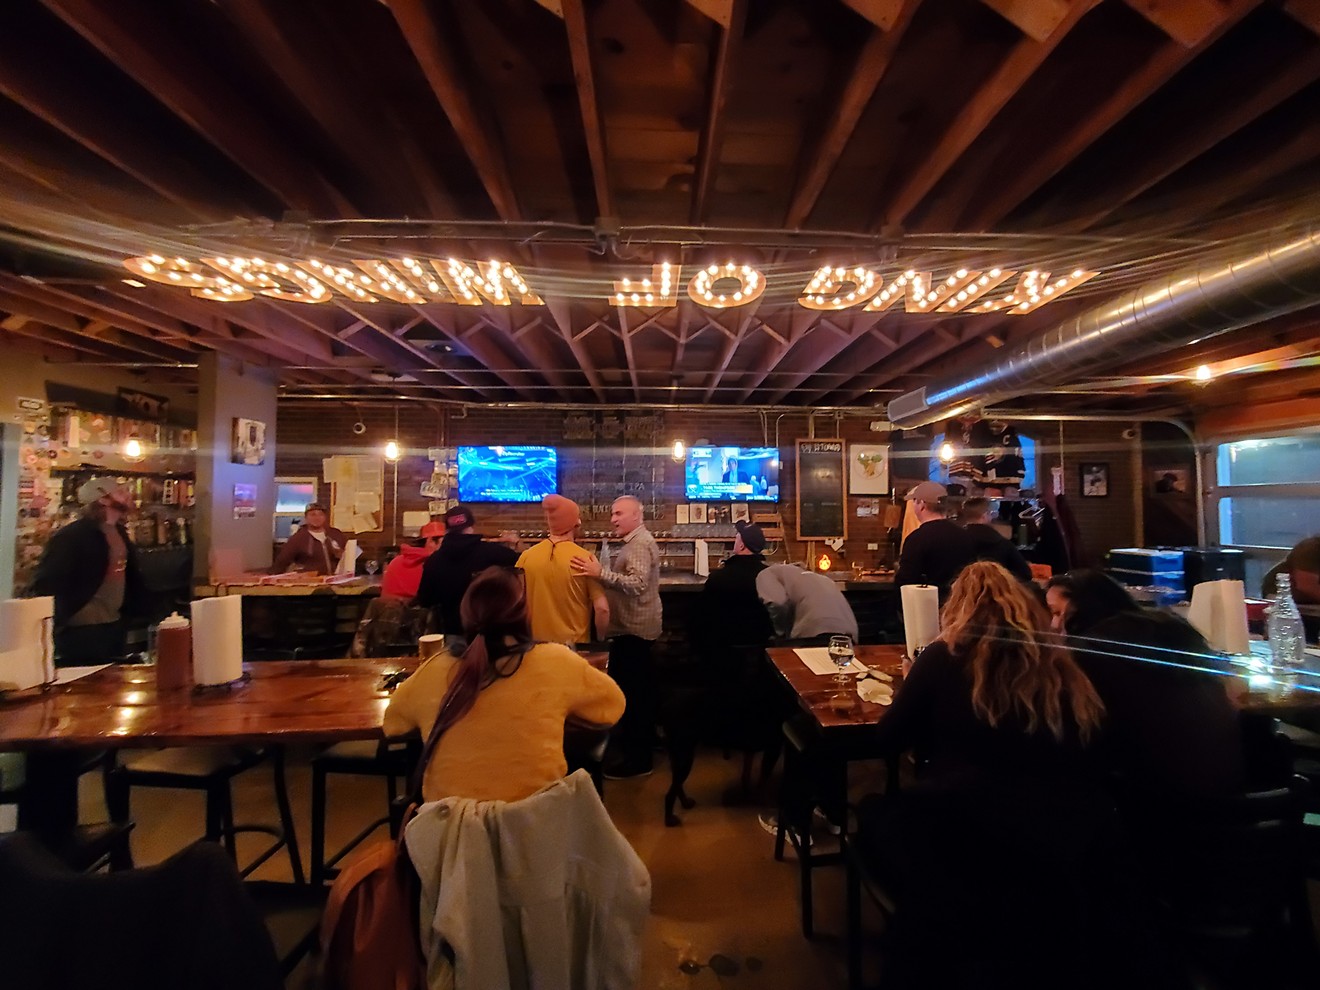 The seats at King of Wings filled up on December 7 for a Mikey's Meats pop-up.